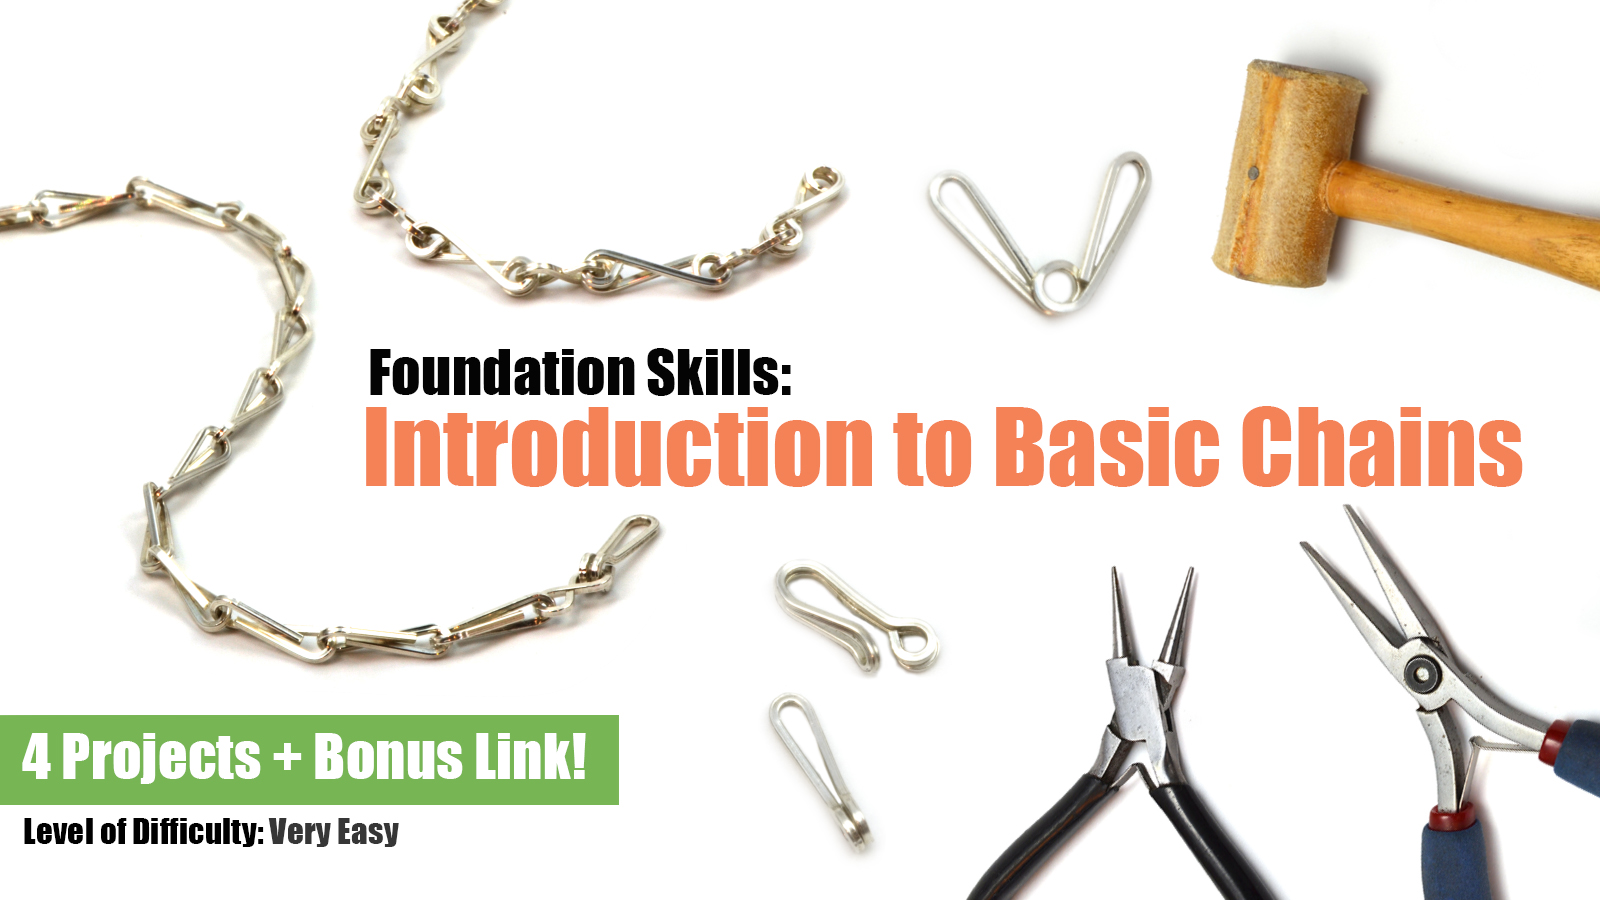 Foundation Skills: Introduction to Basic Chains by Dianne Karg Baron, The Tao of Wire, an online video course for beginner wire jewelry